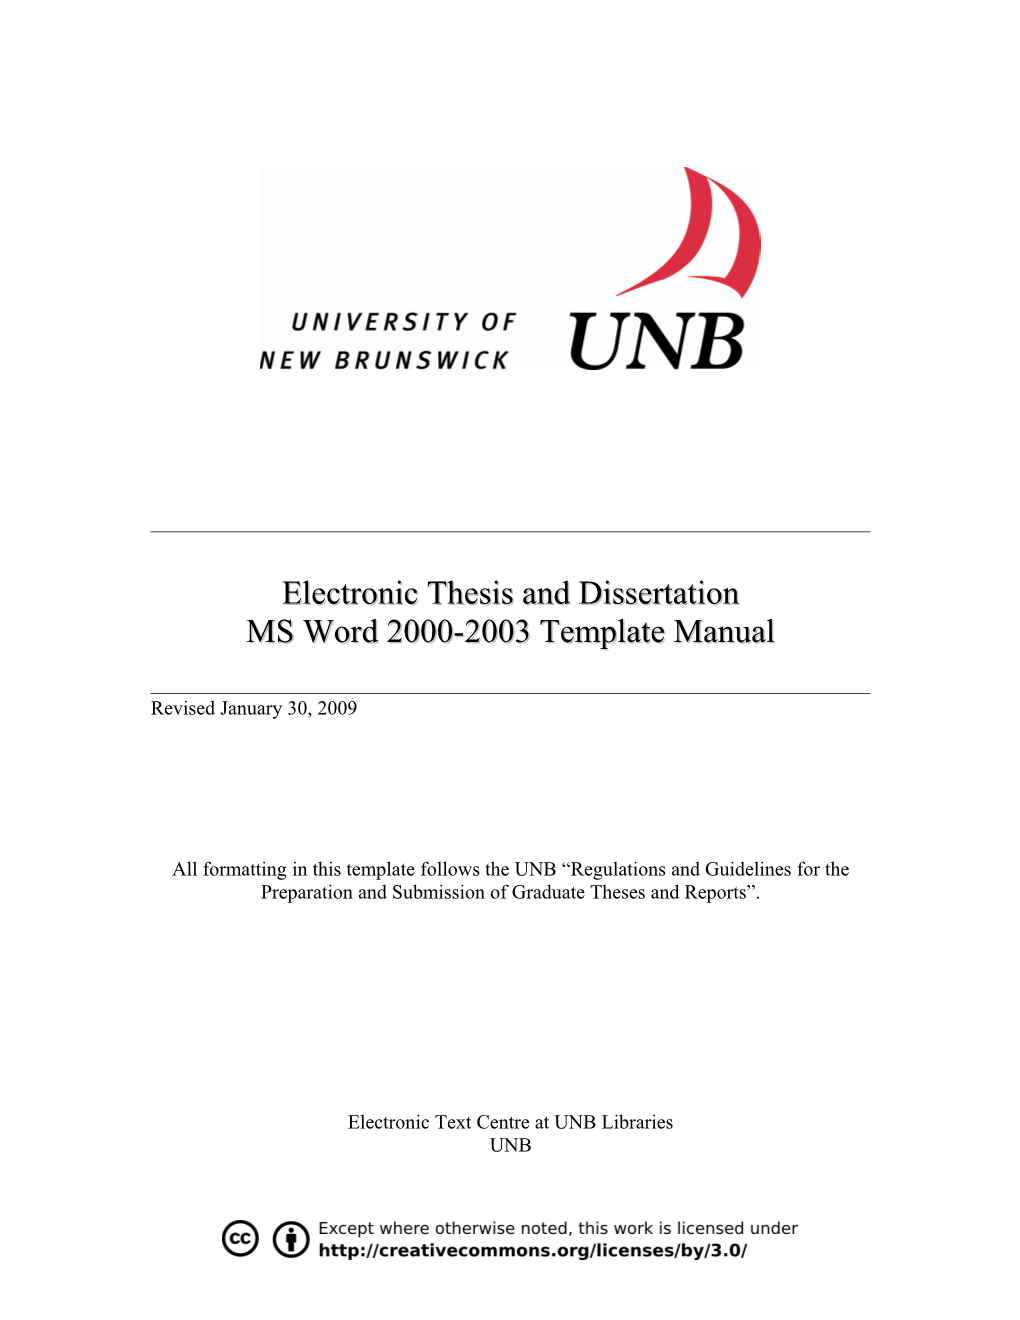 Electronic Thesis and Dissertation